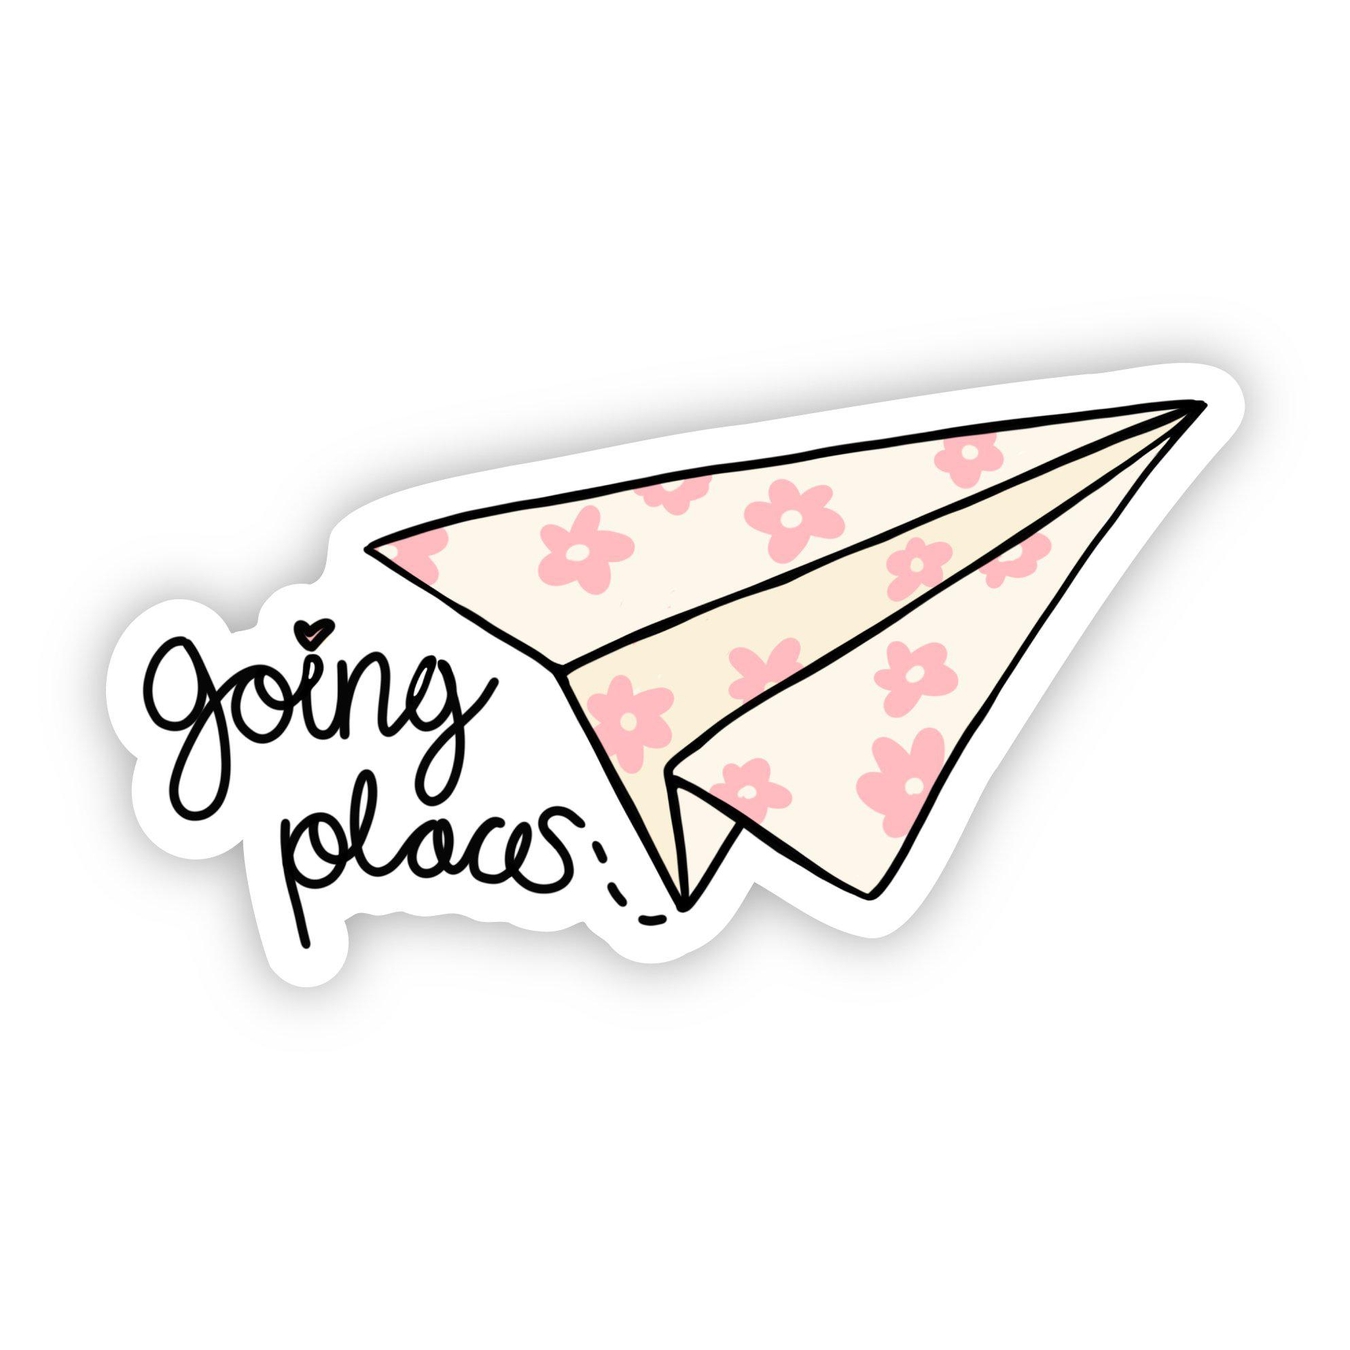 Big Moods Going Places Paper Airplane Sticker